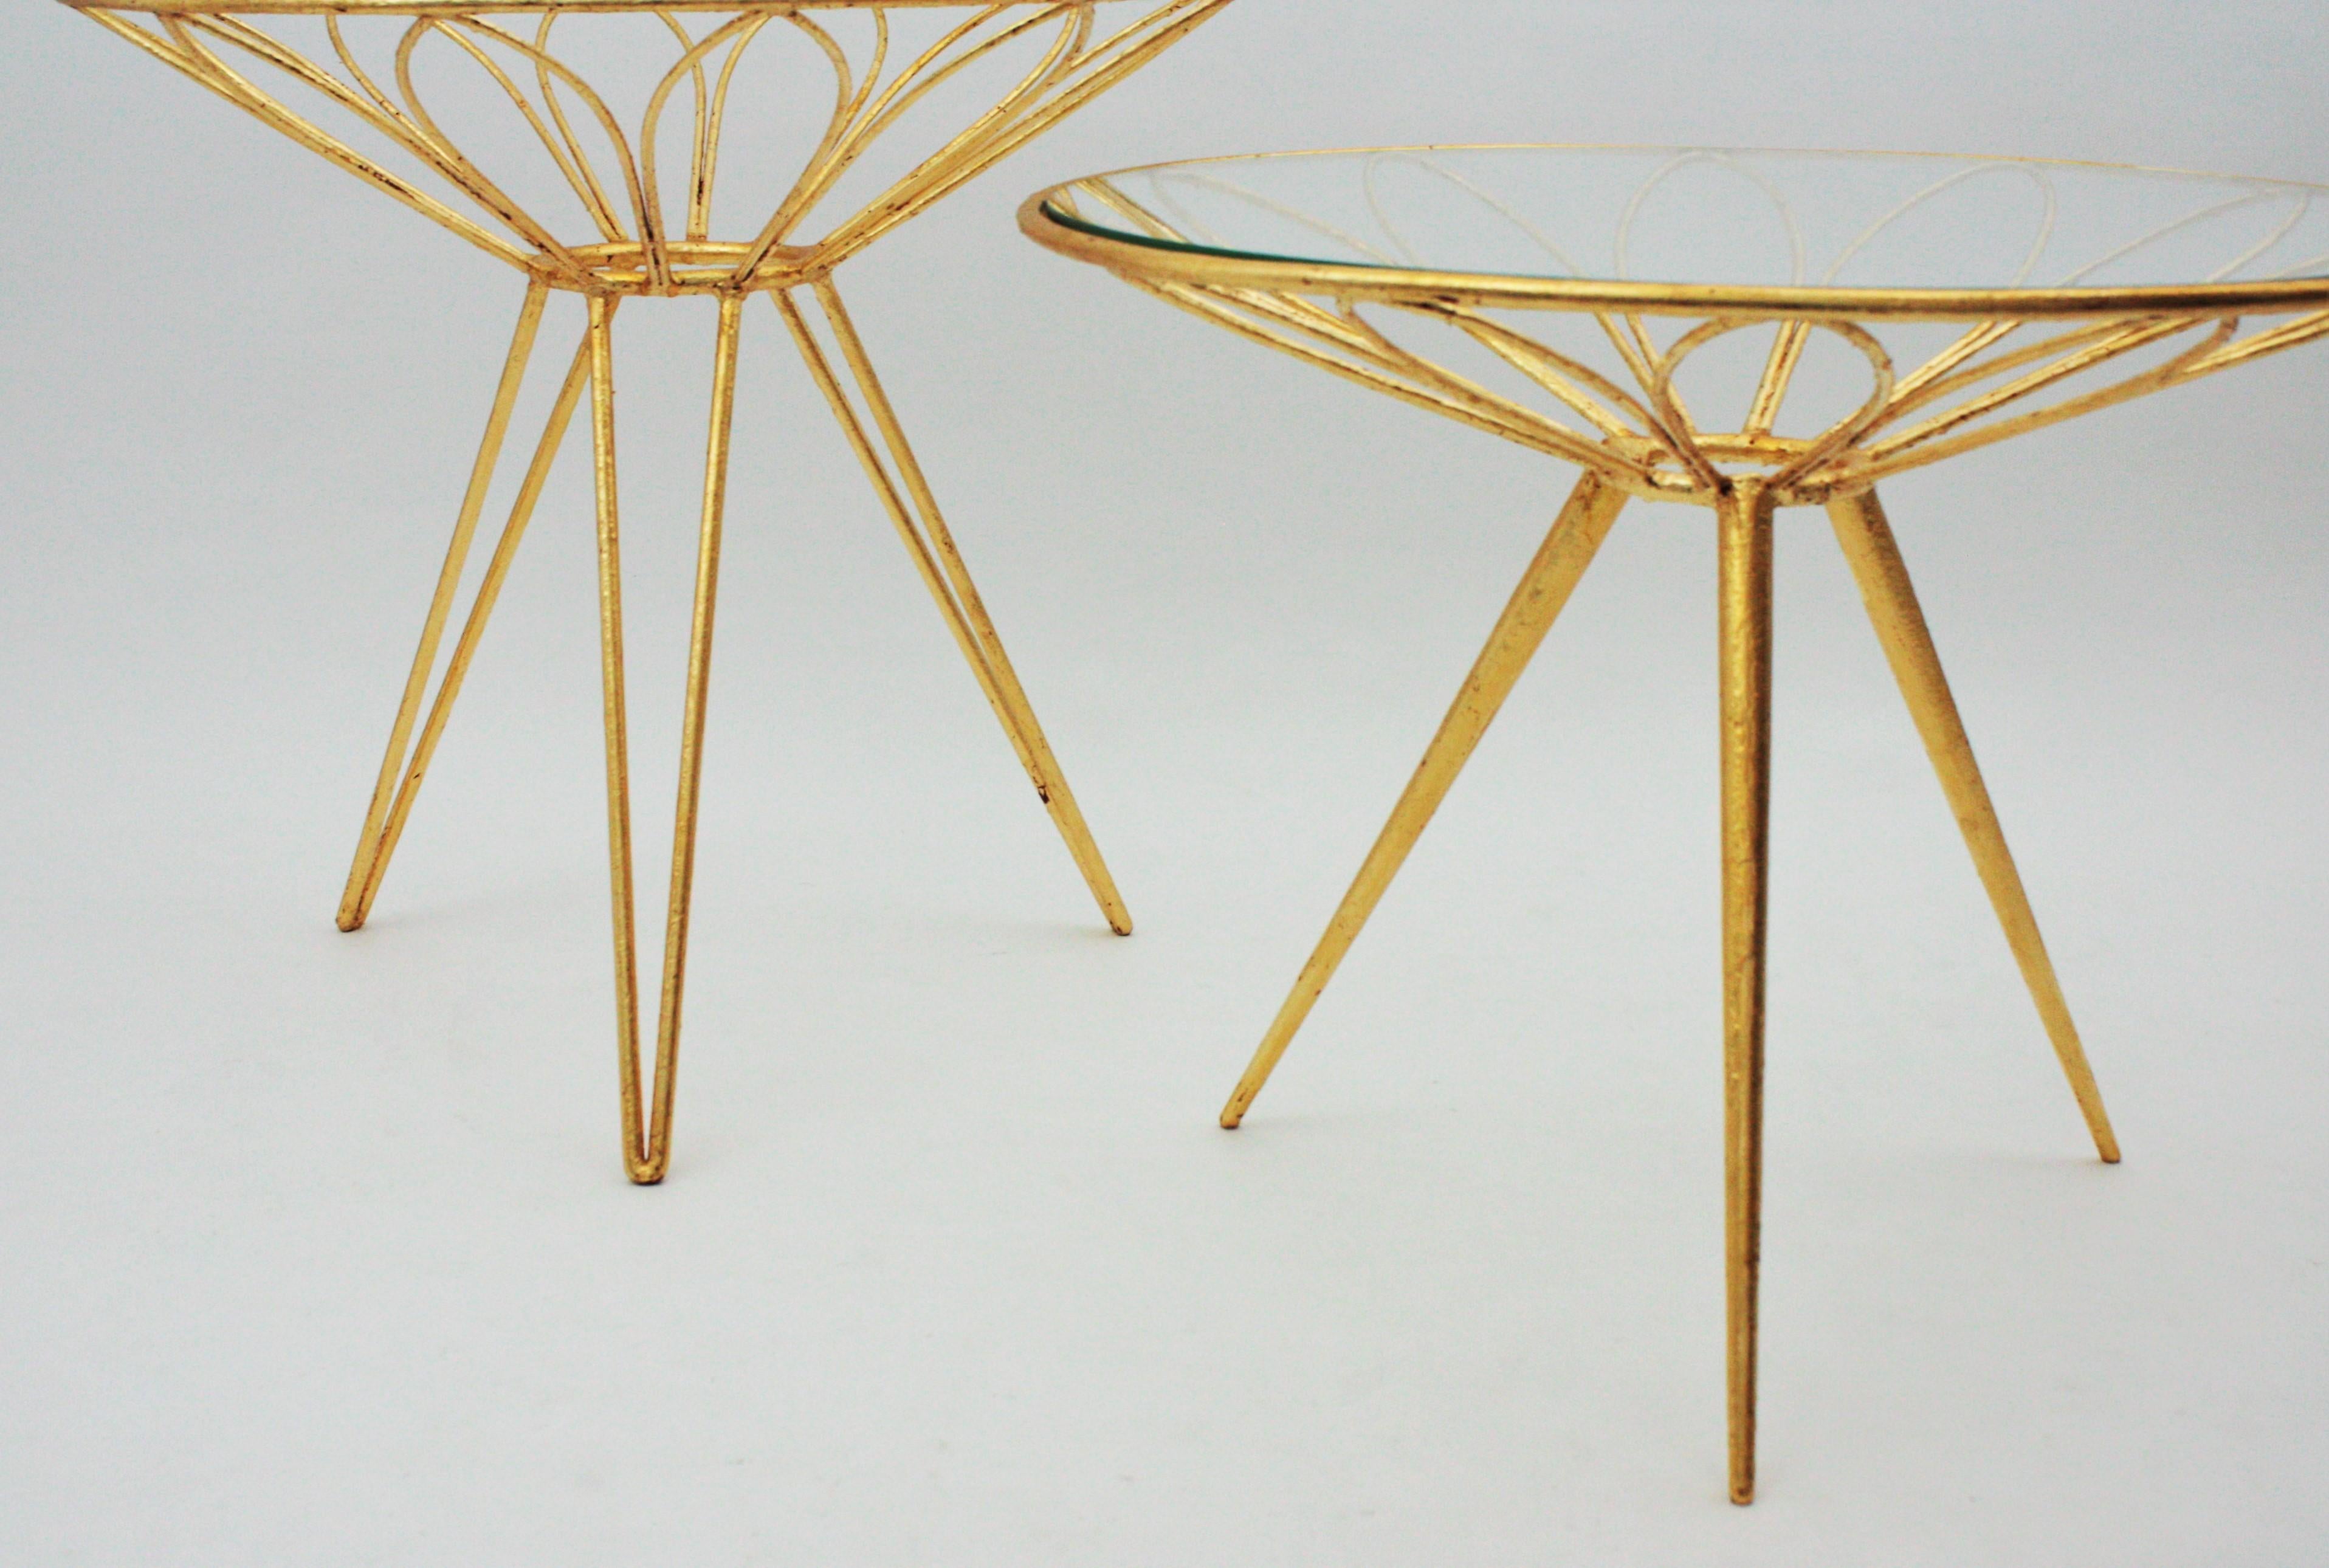 French Side Tables in Gilt Iron Daisy Flower Design, 1950s For Sale 6